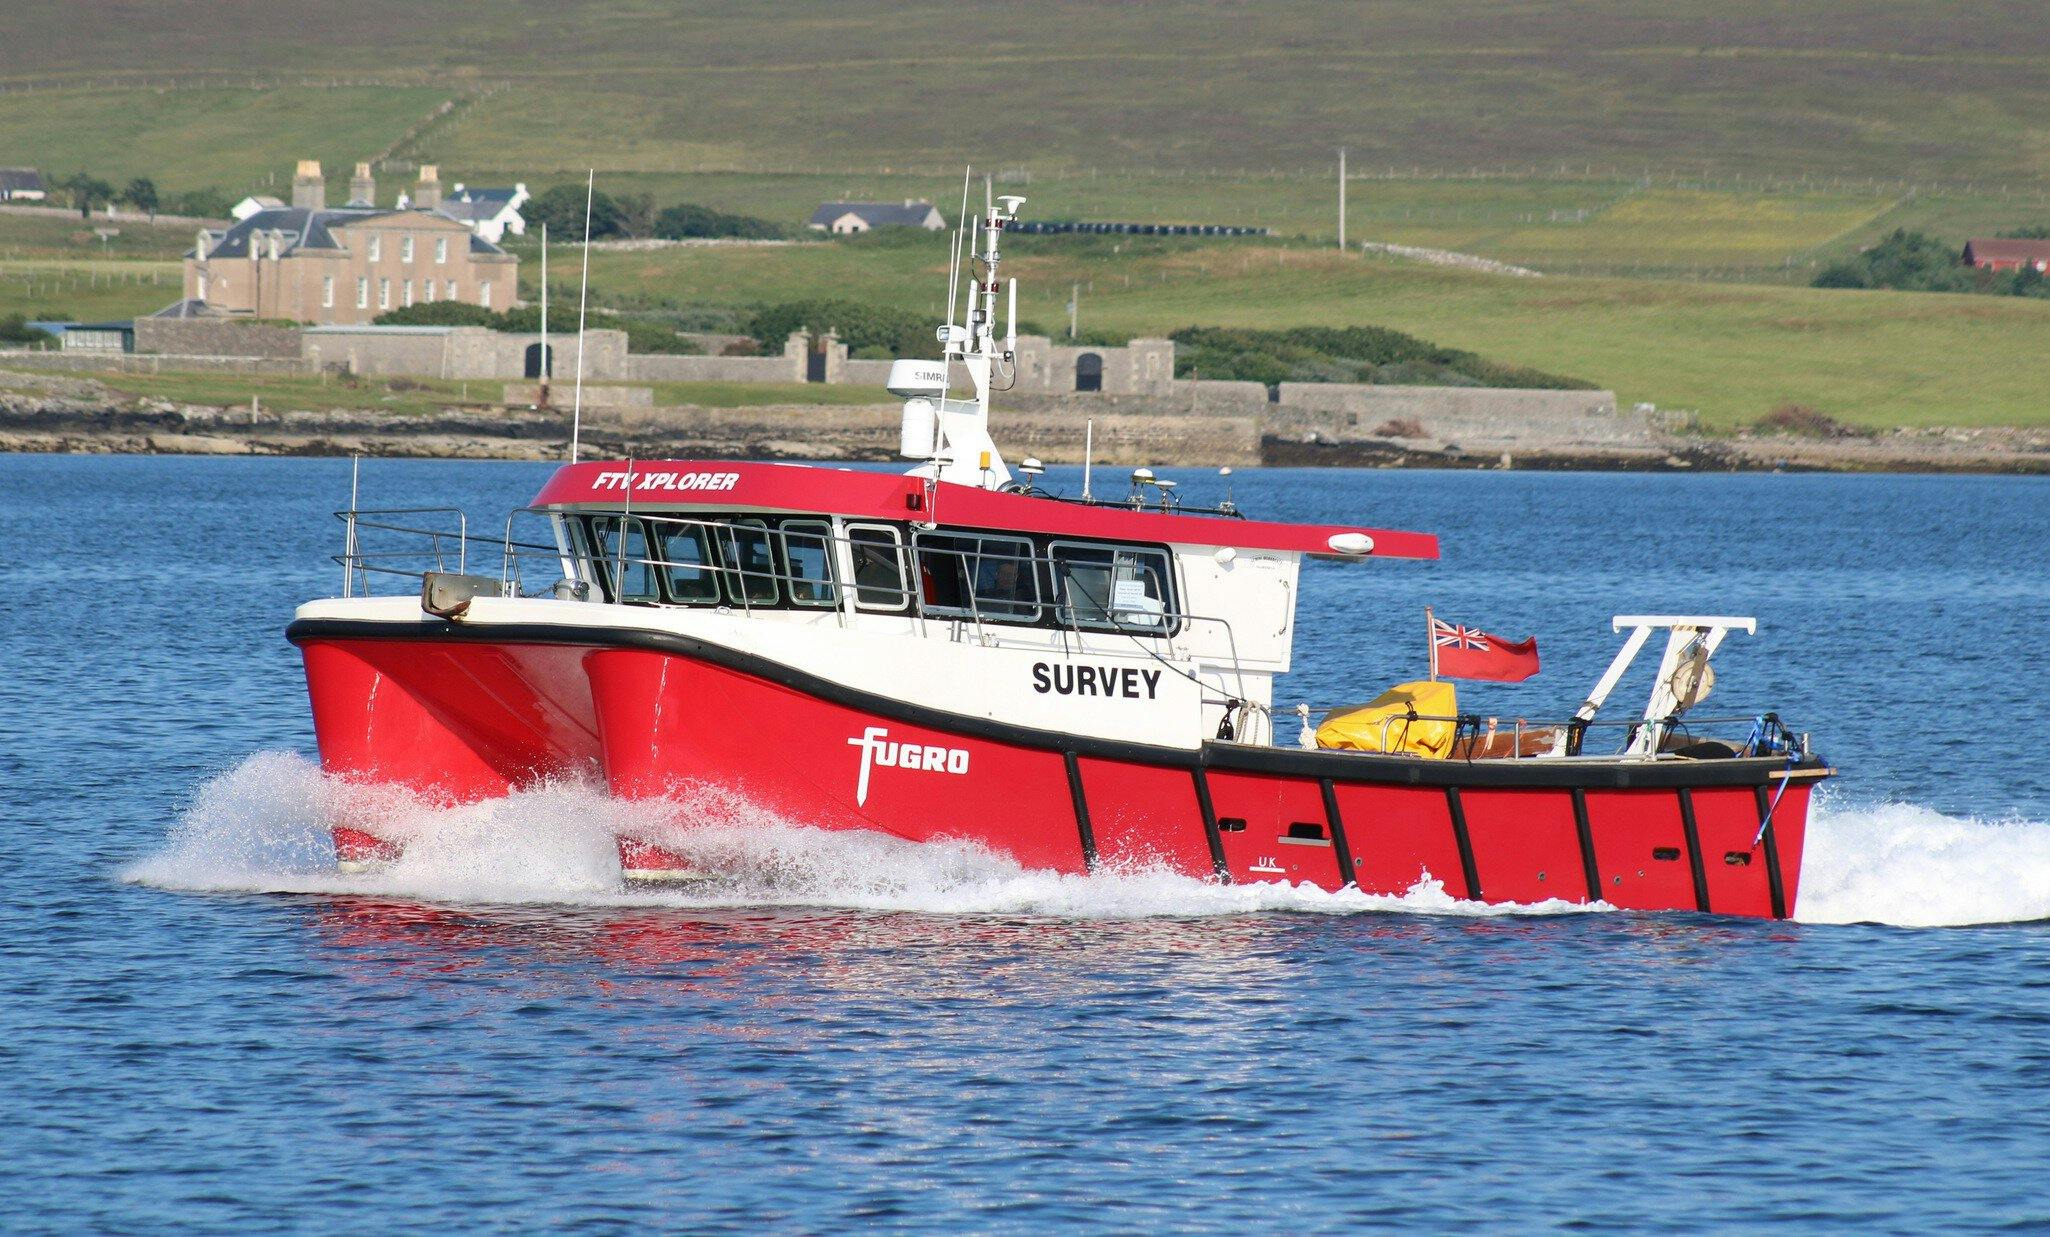 Fugro FTV Xplorer - one of the dedicated training vessels, used for hands-on training of Fugro staff in various offshore and maritime disciplines.